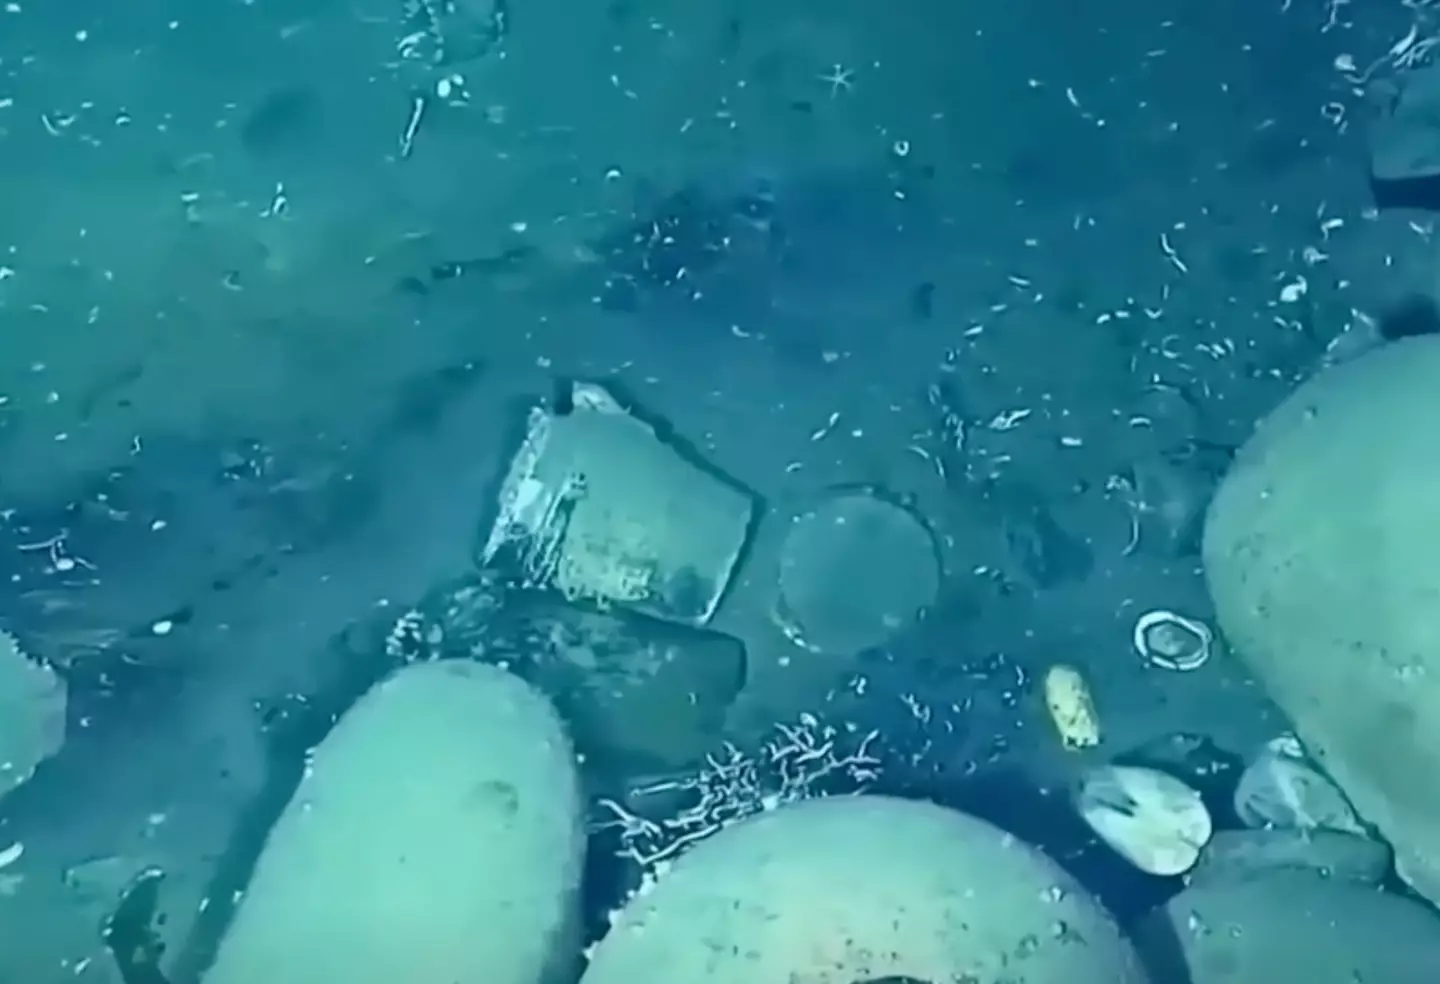 The shipwreck was discovered back in 2015.